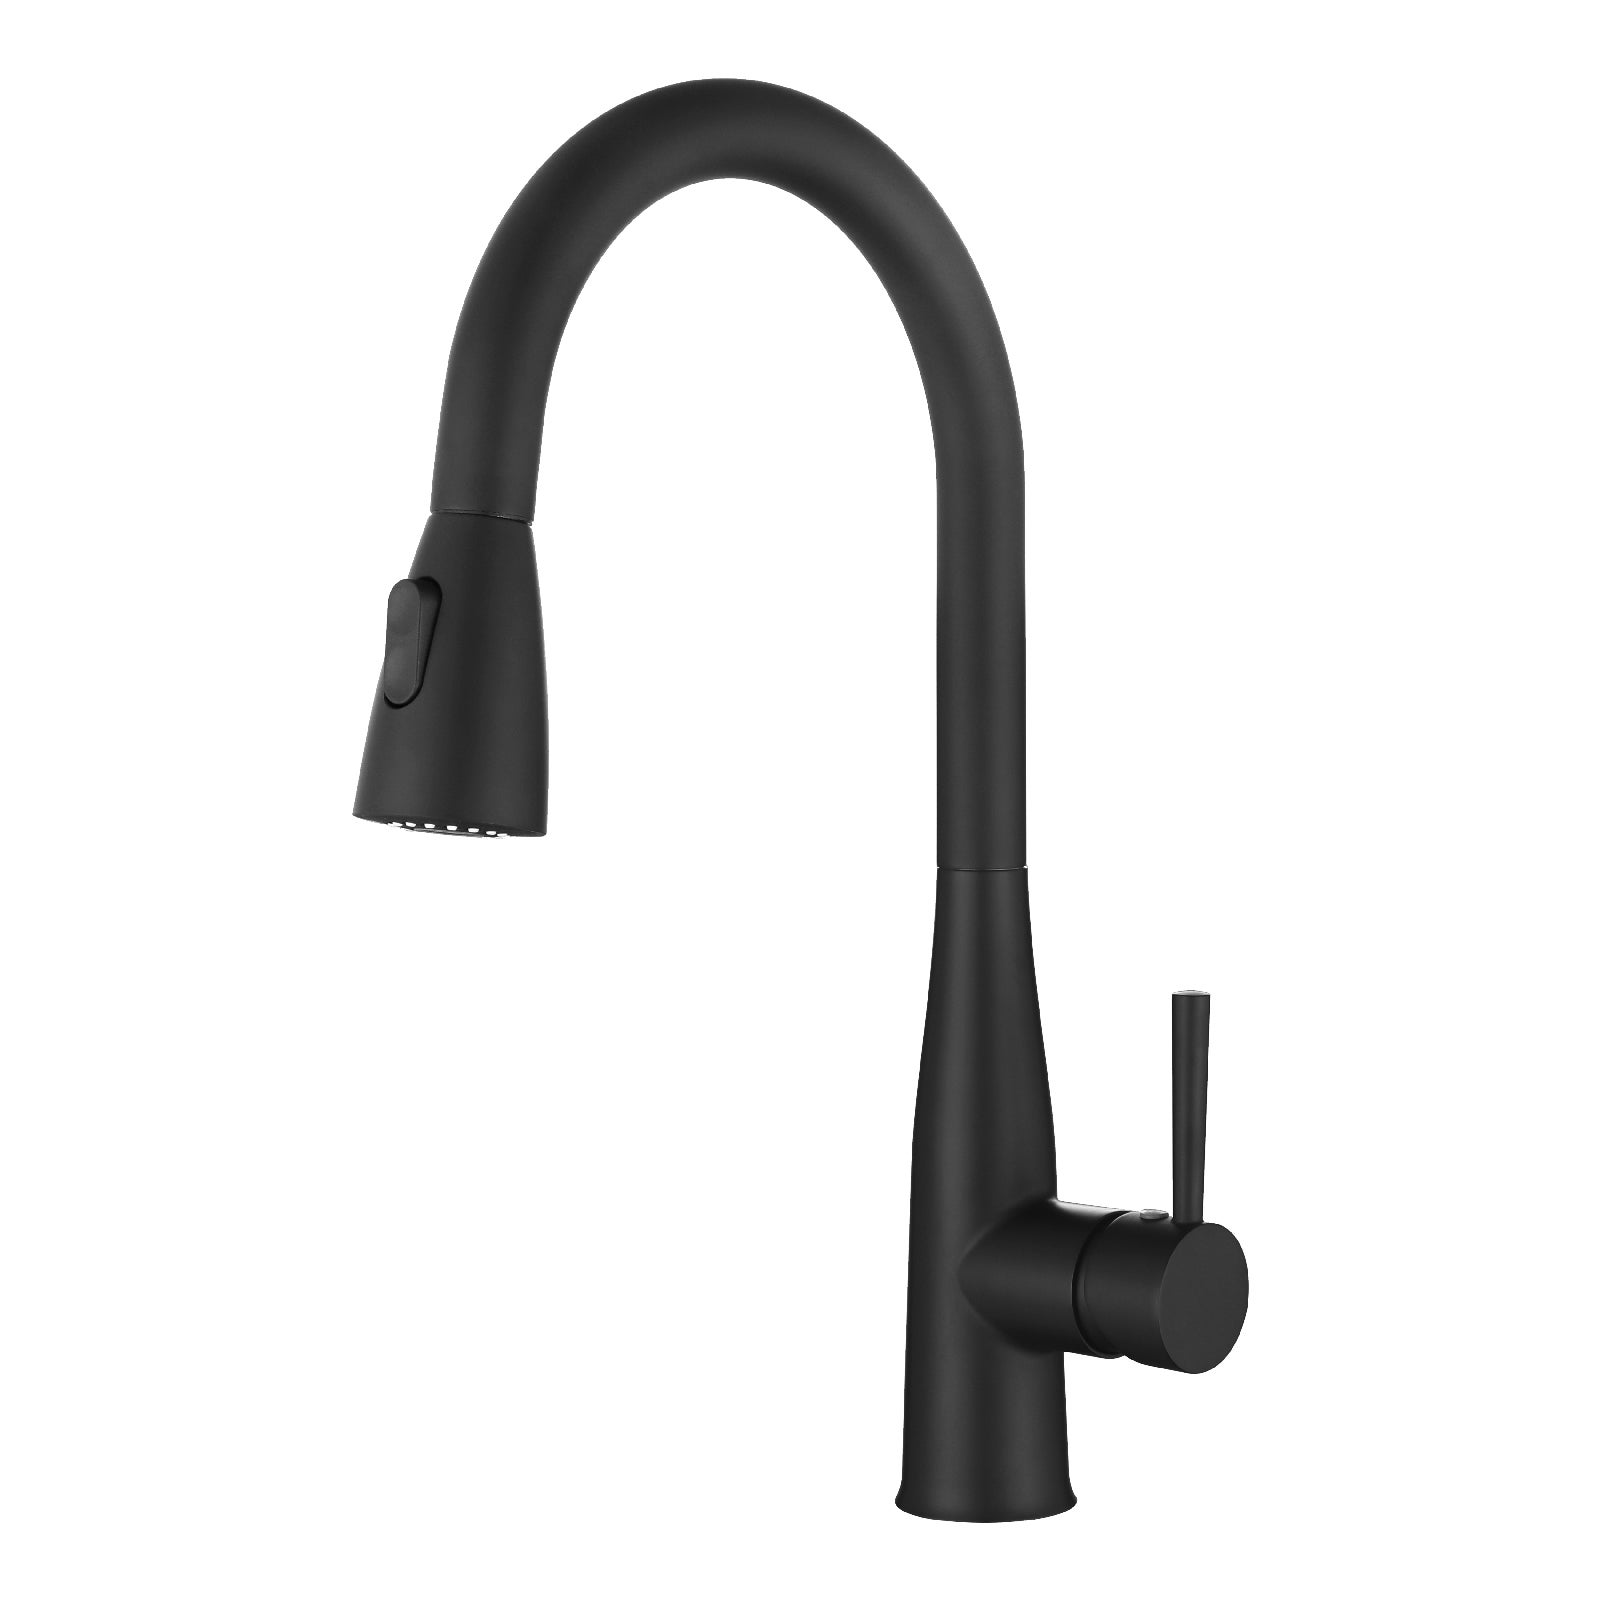 Decaura Pull Out Kitchen Mixer Tap Black Basin Taps Faucet Swivel Spout Brass 2-Way